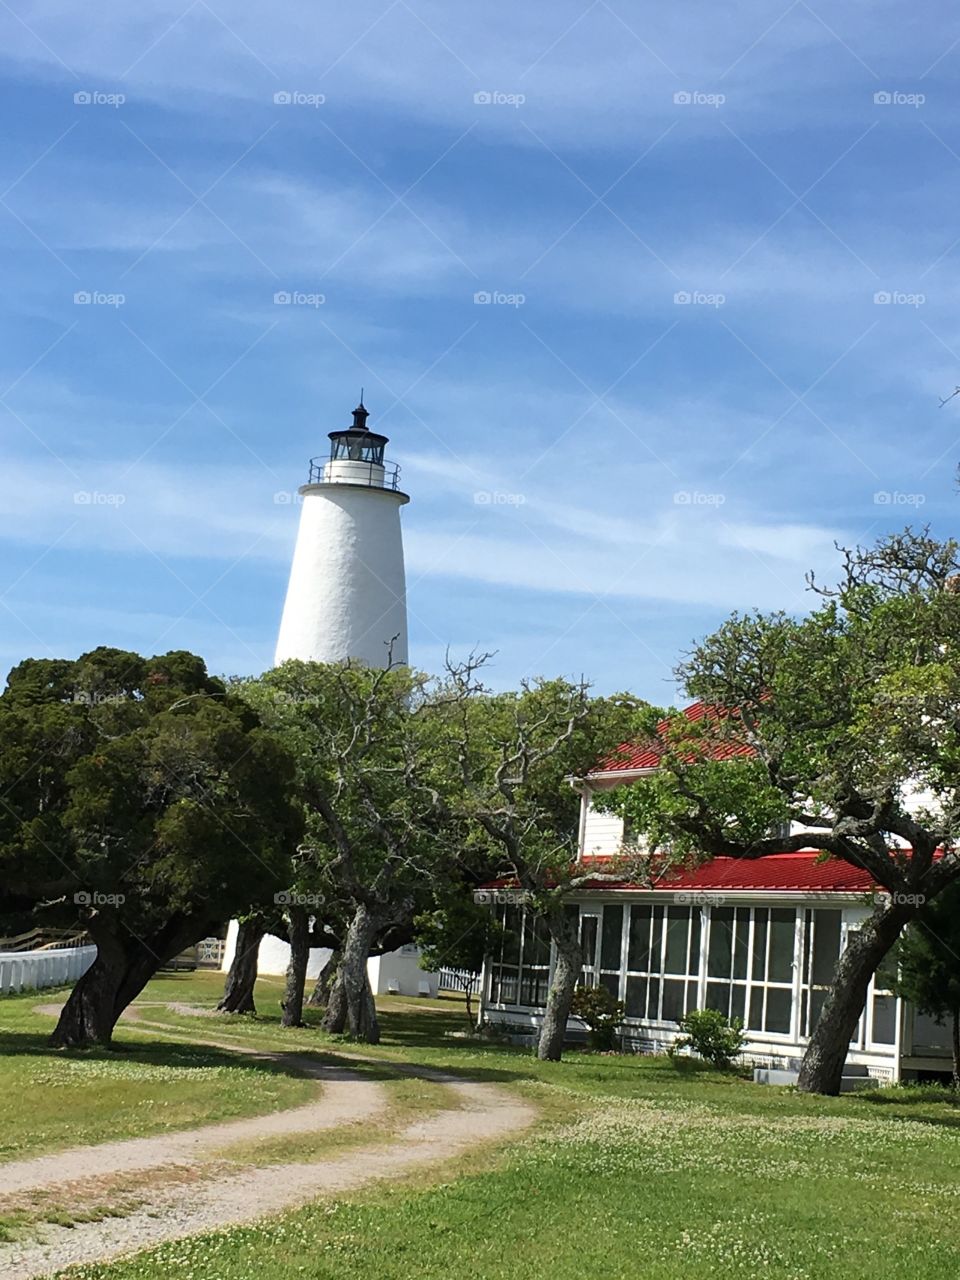 Lighthouse at Ocracoke Inlet, NC with lighthouse keepers residence on the right.